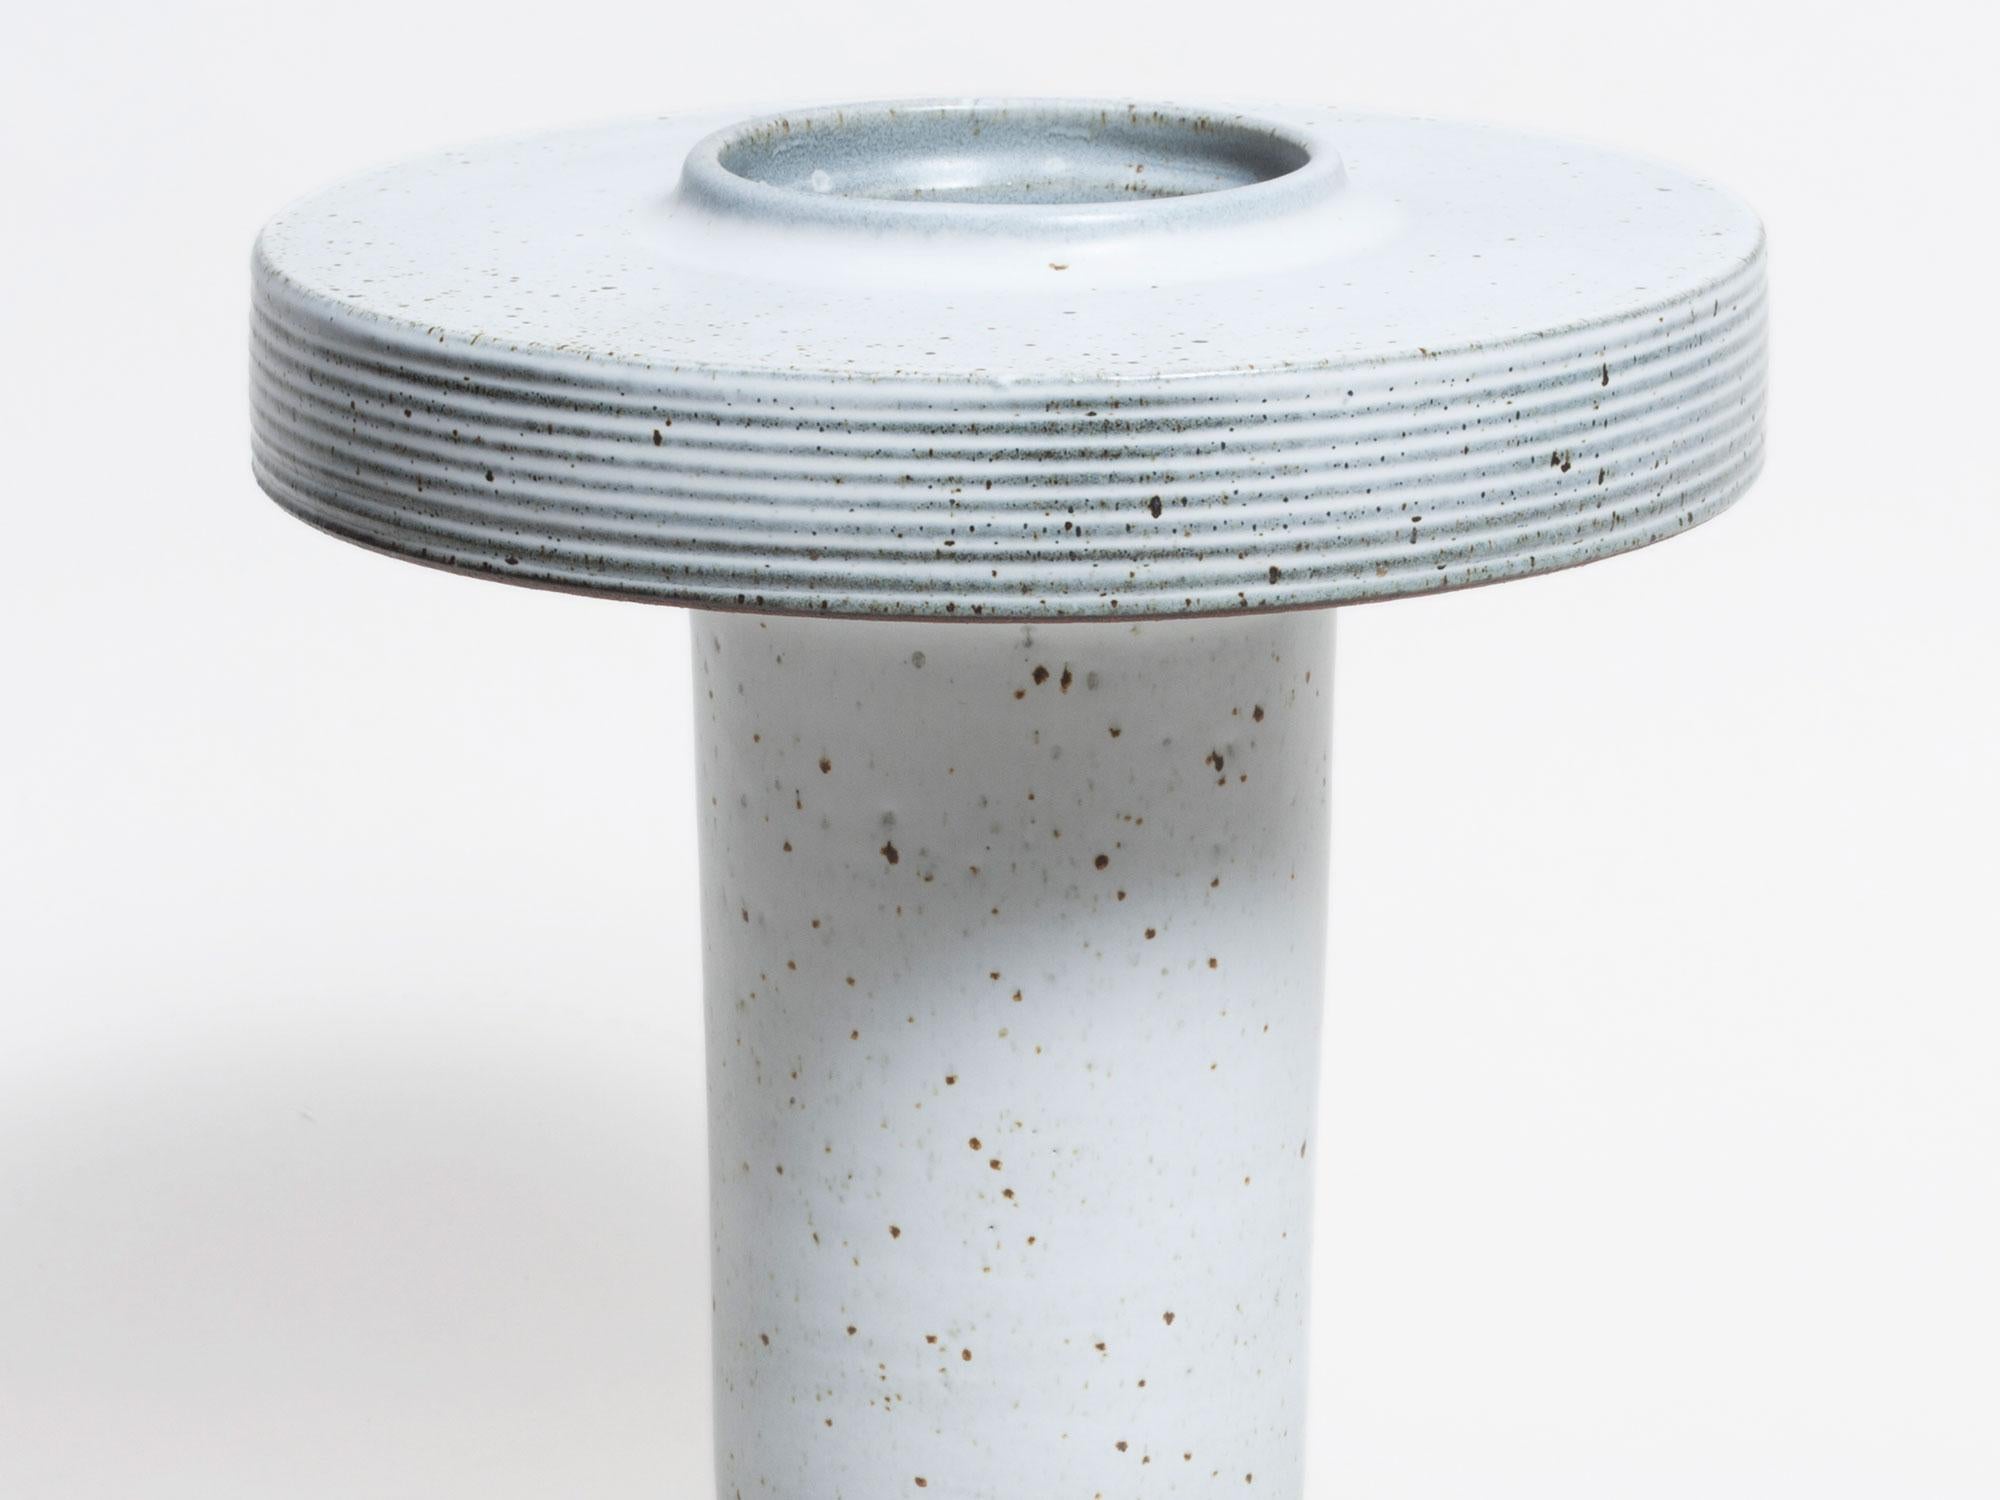 From a series of architectural ceramic vessels made by Ian McDonald for his exhibition 